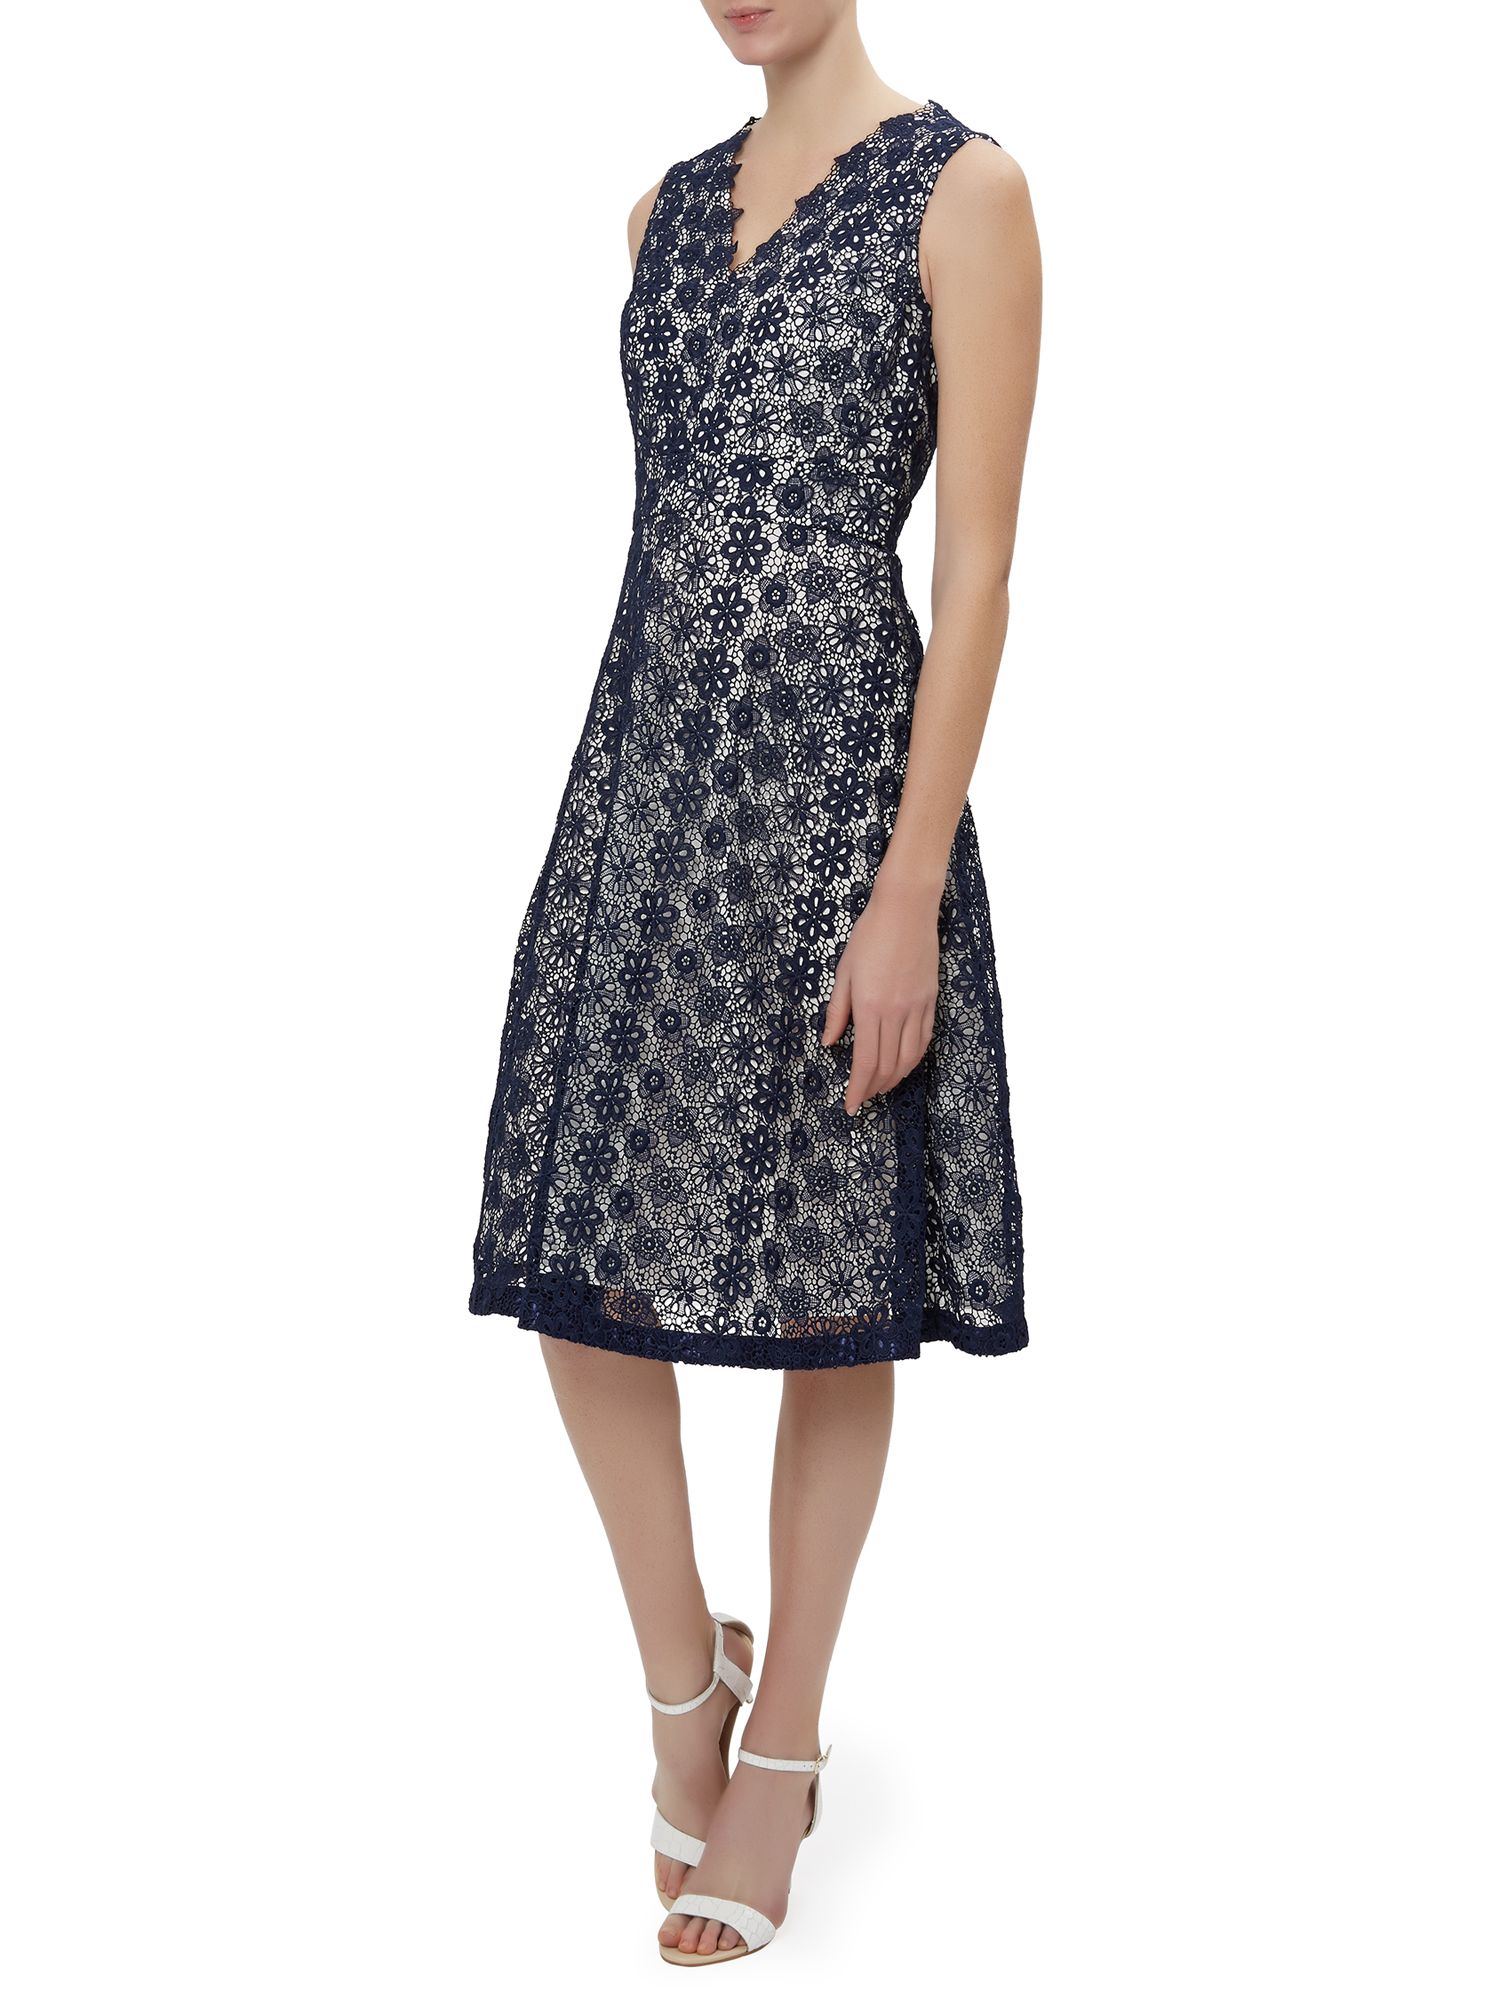 Damsel in a dress Lace Dress, Navy at John Lewis